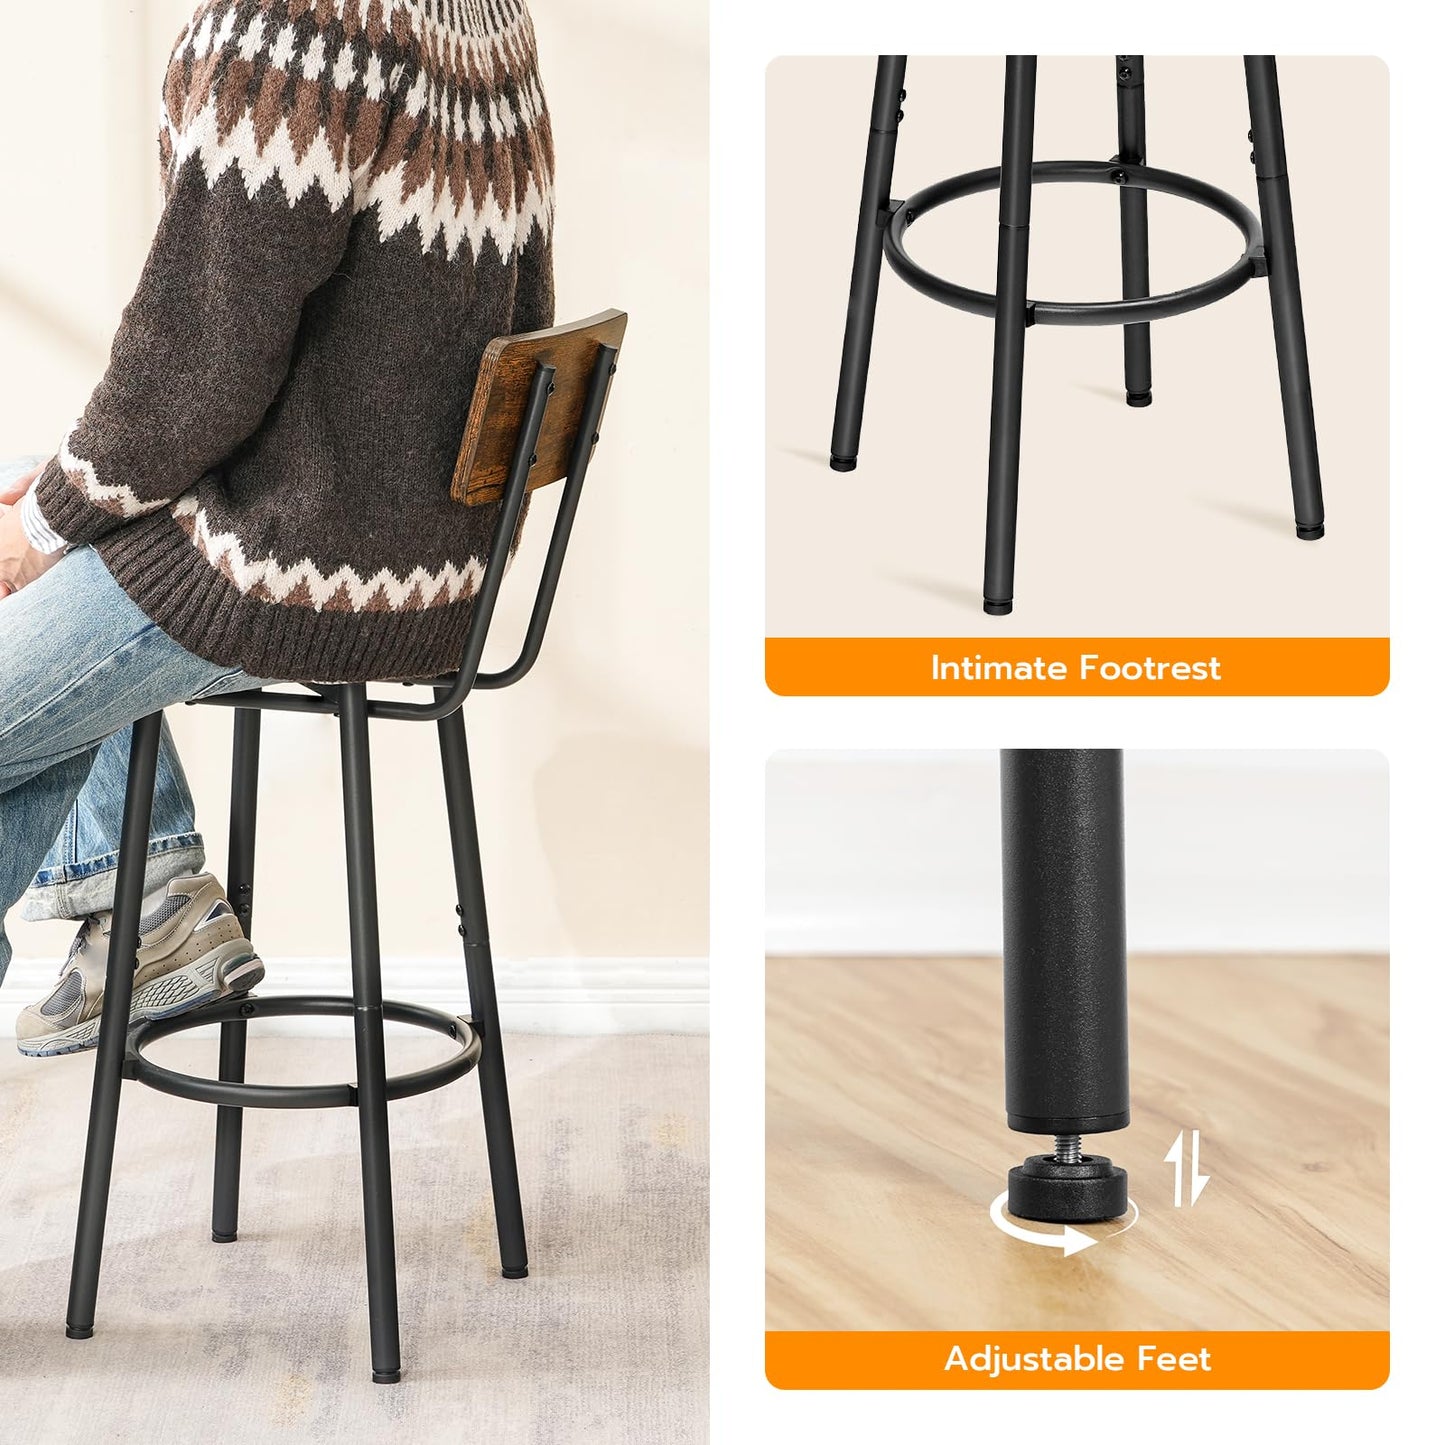 HOOBRO Bar Stools,Set of 2 Bar Stools with Footrest and Back,25.2" Bar Chairs for Kitchen Island, Dining Room,Counter Height Bar Stools, Easy to